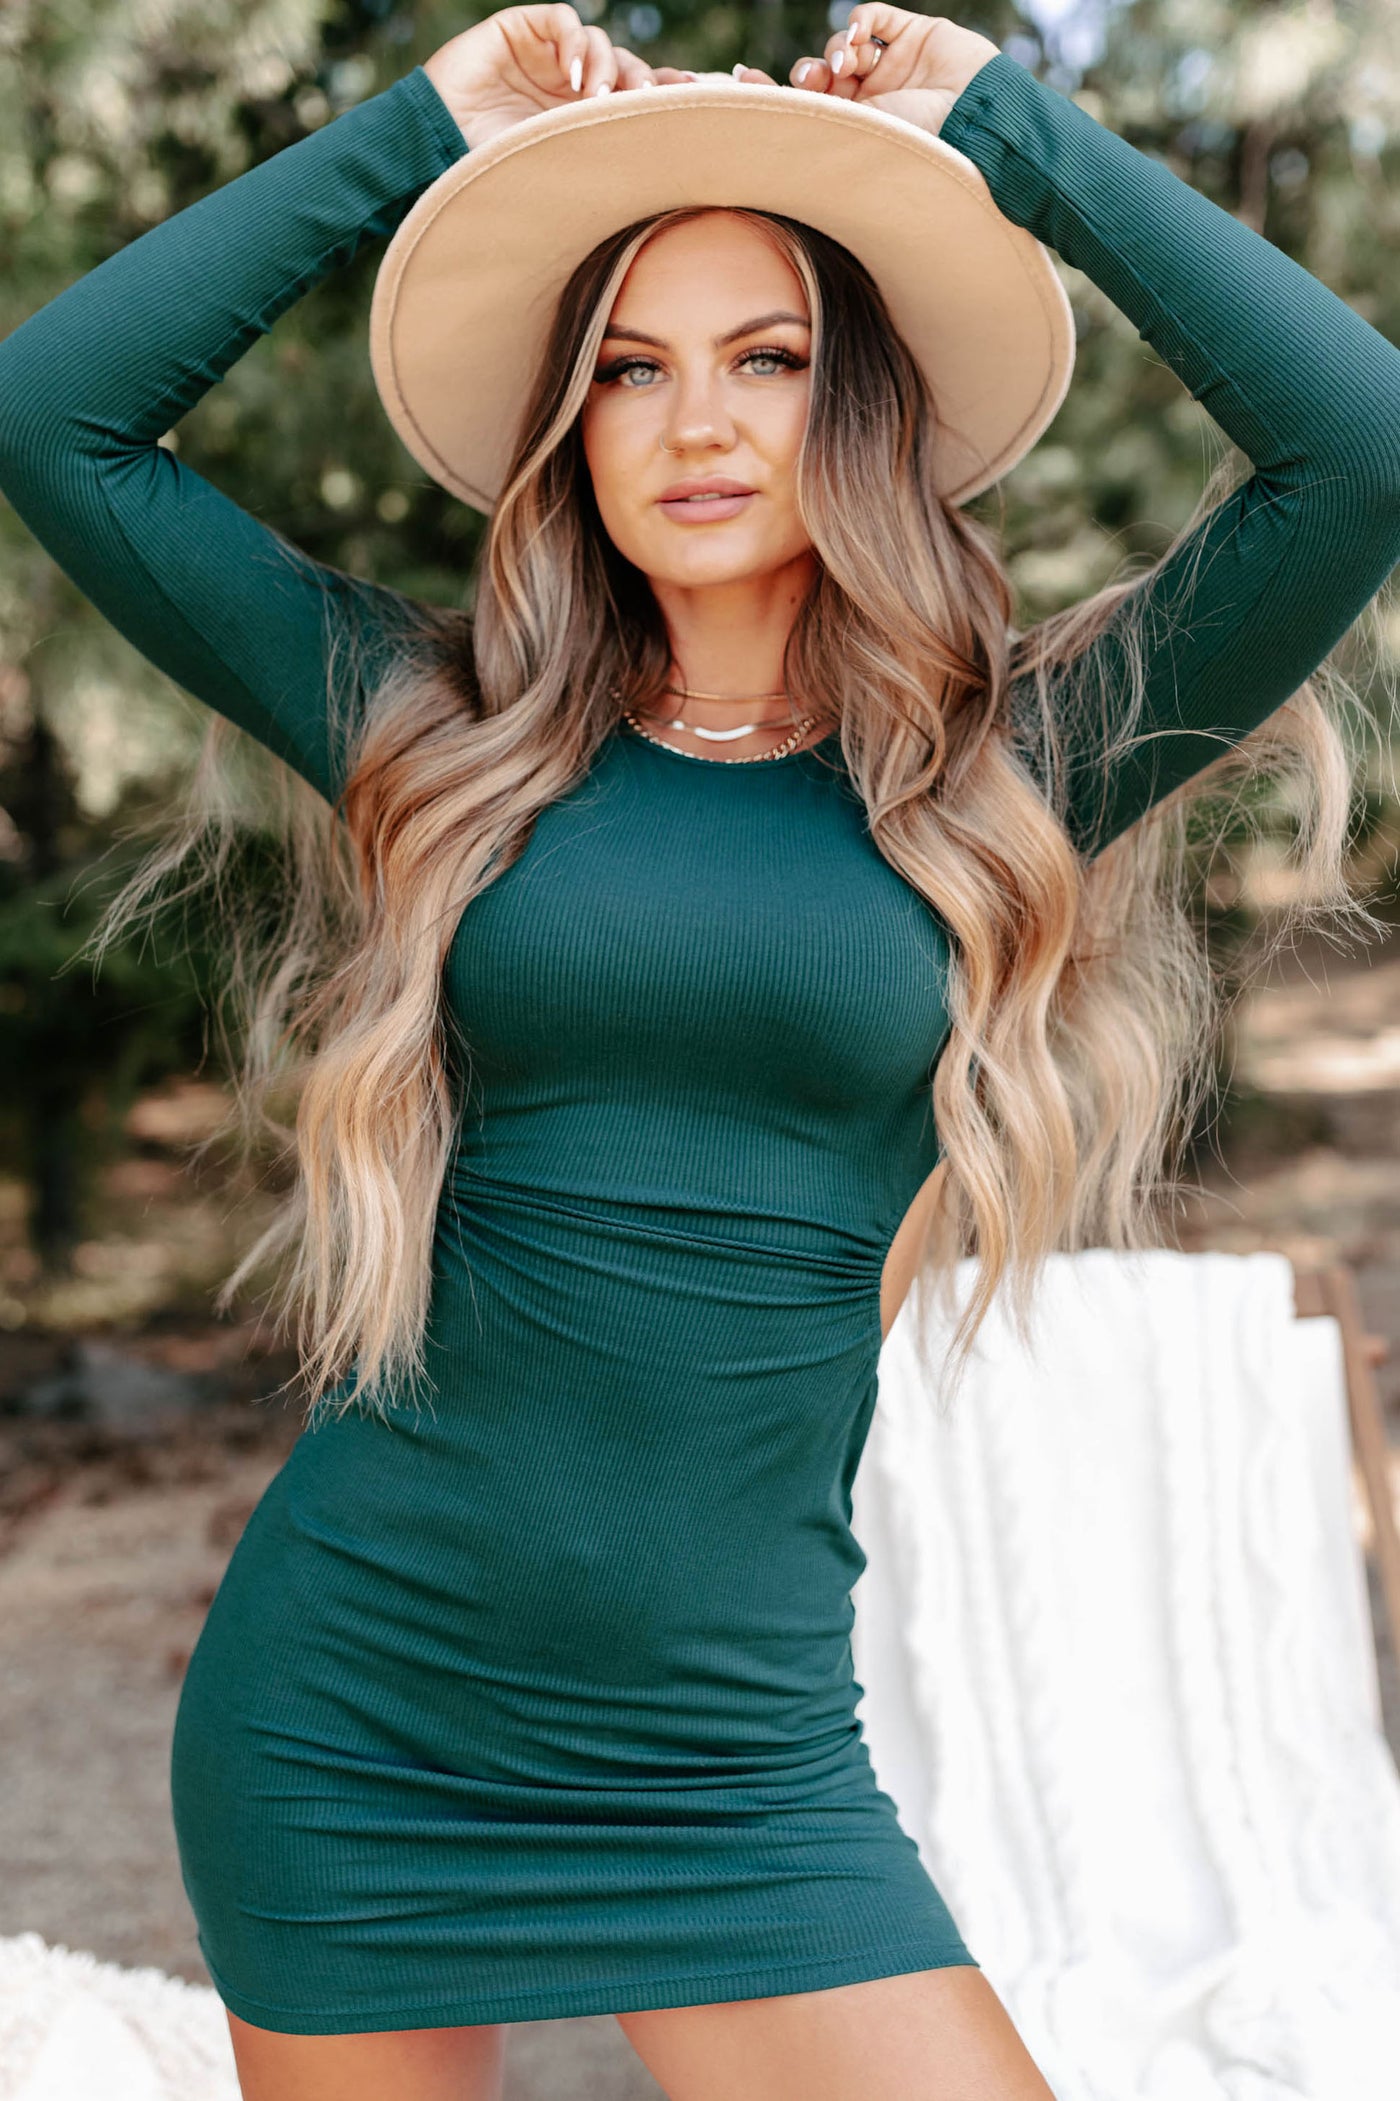 Bring The Attention Padded Sweetheart Bodysuit (Hunter Green